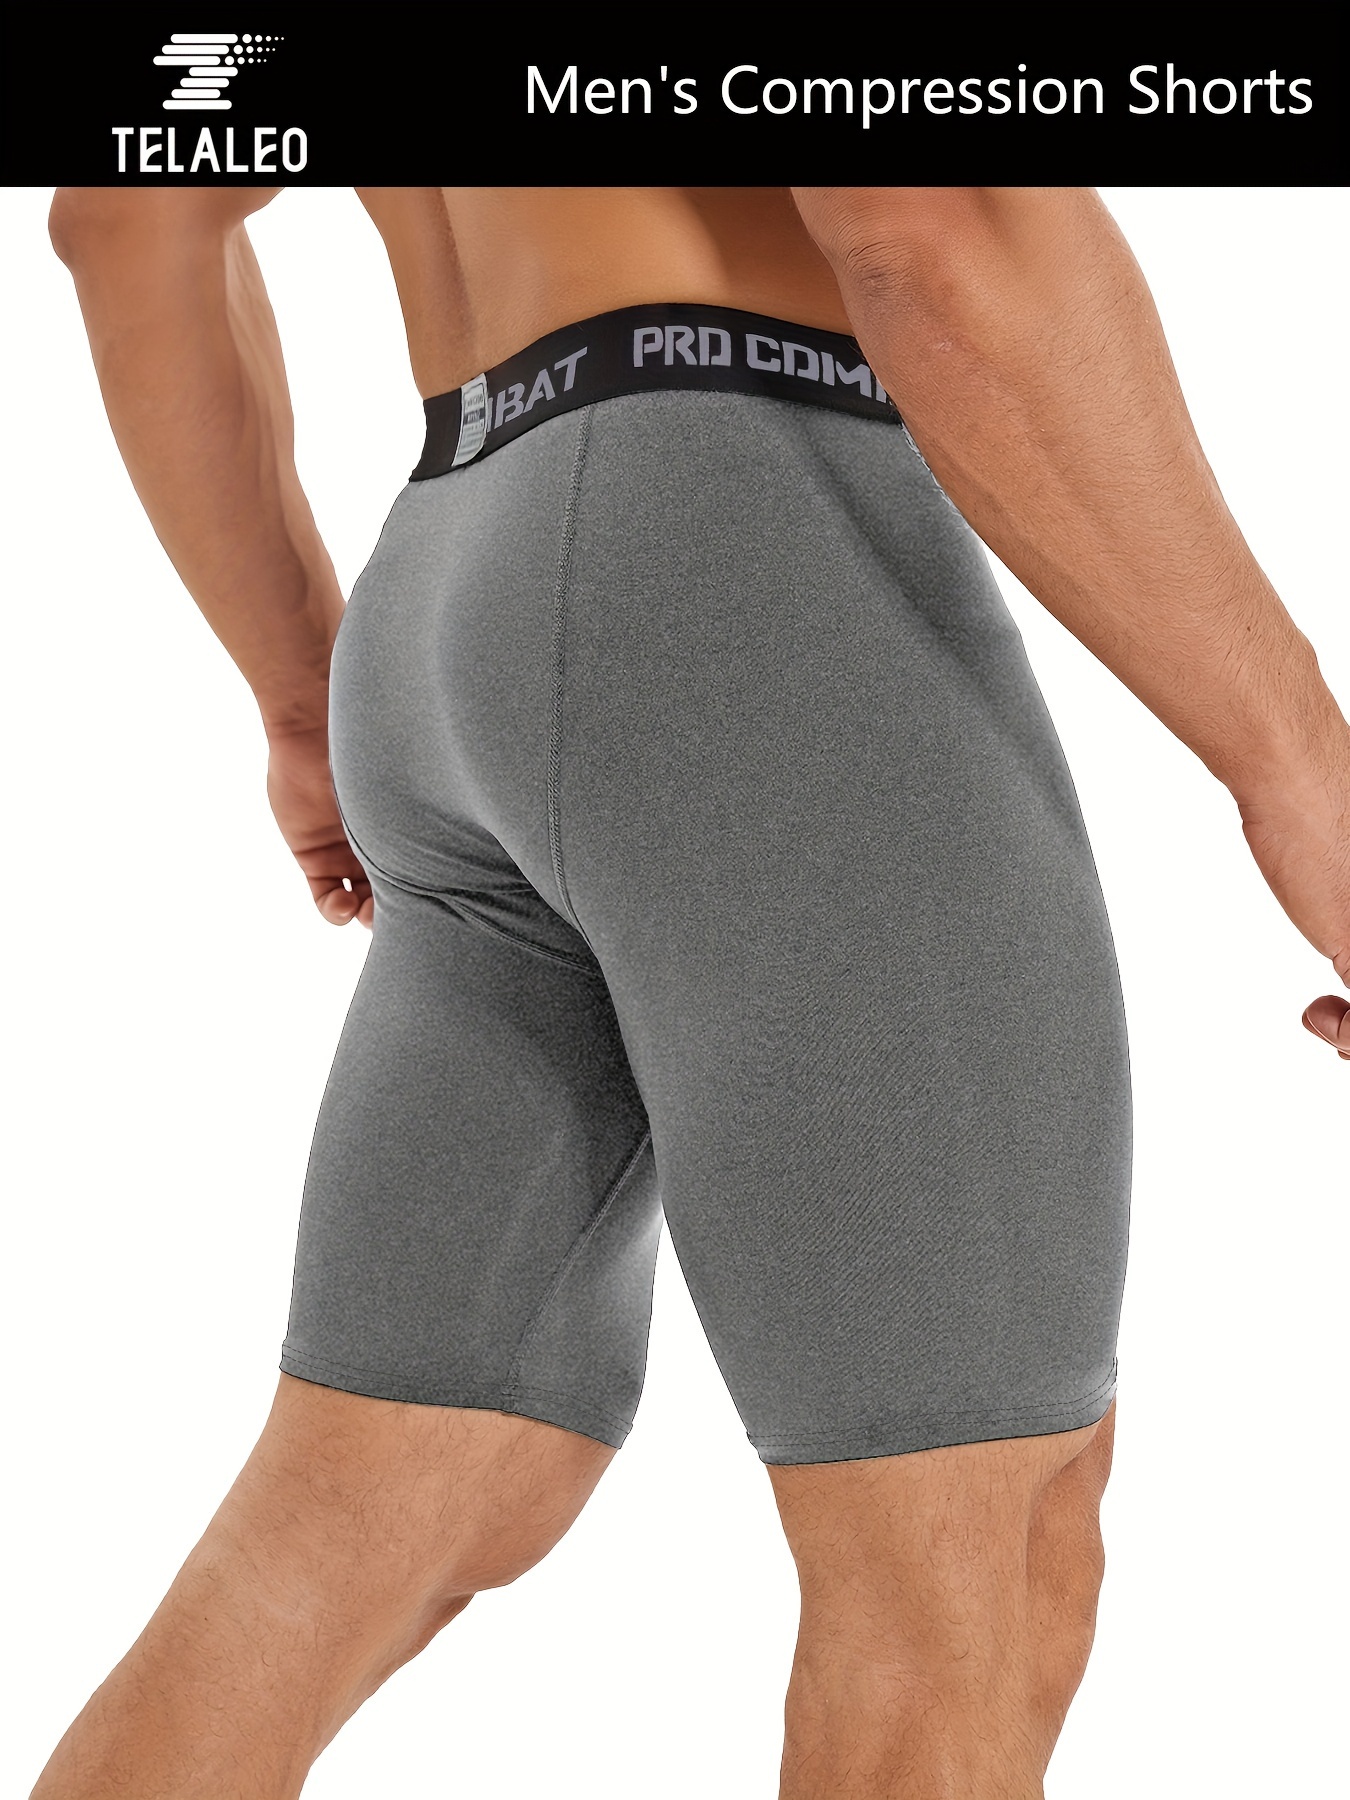 Men's Pro Combat Compression Shorts - Quick-Dry, Breathable Sports Tights  for Basketball, Running, Gym, Fitness - W703